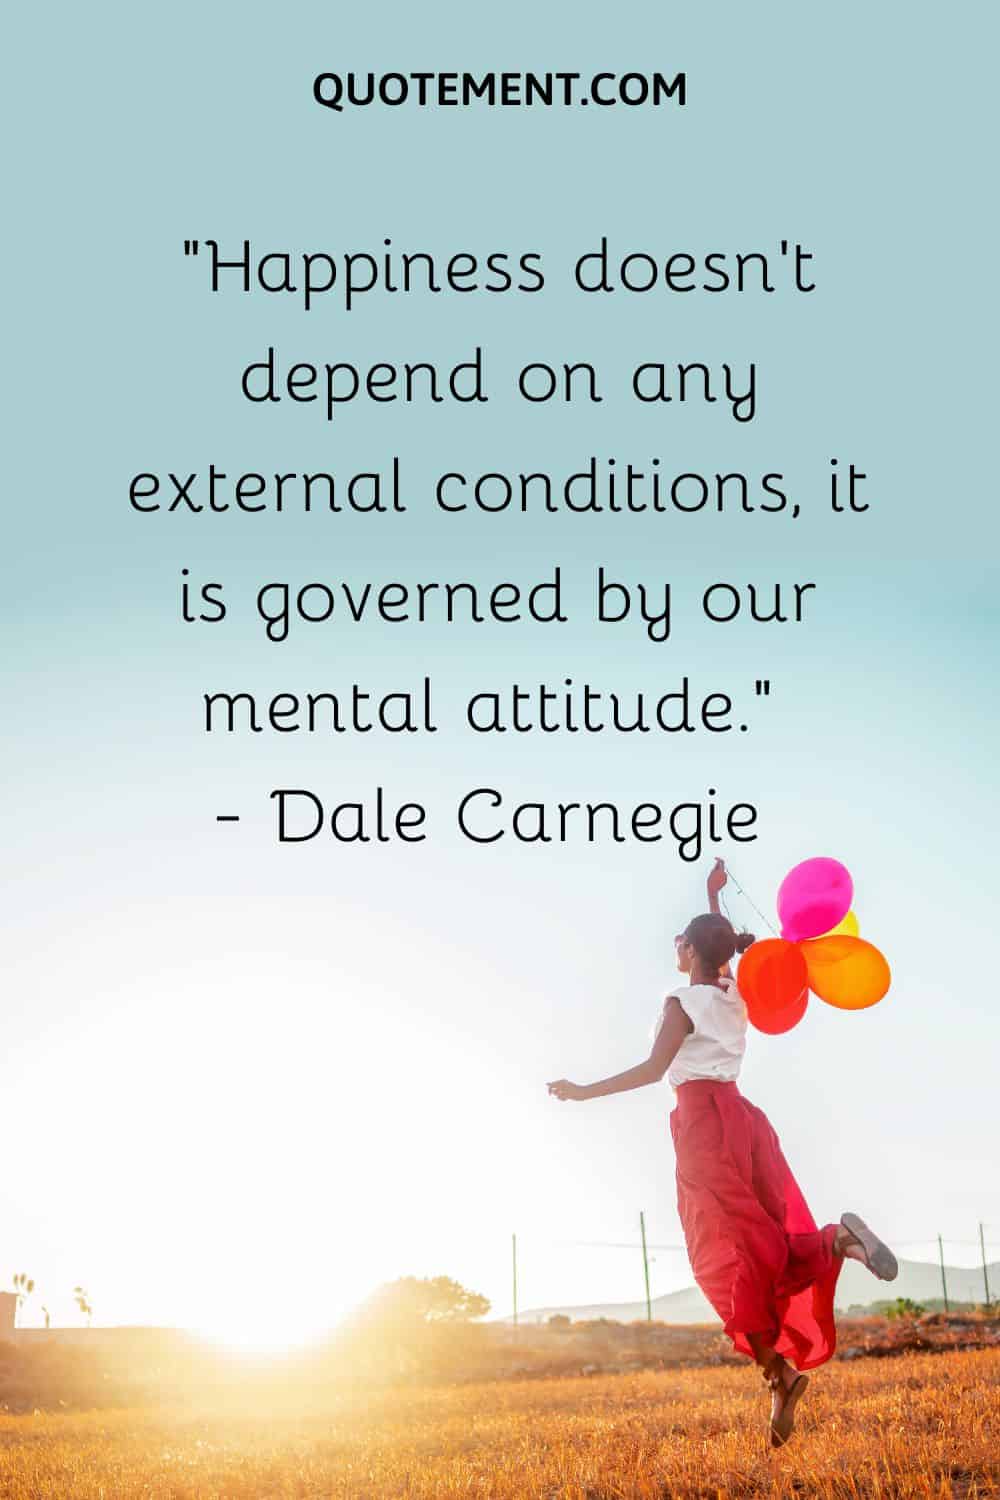 Happiness doesn’t depend on any external conditions